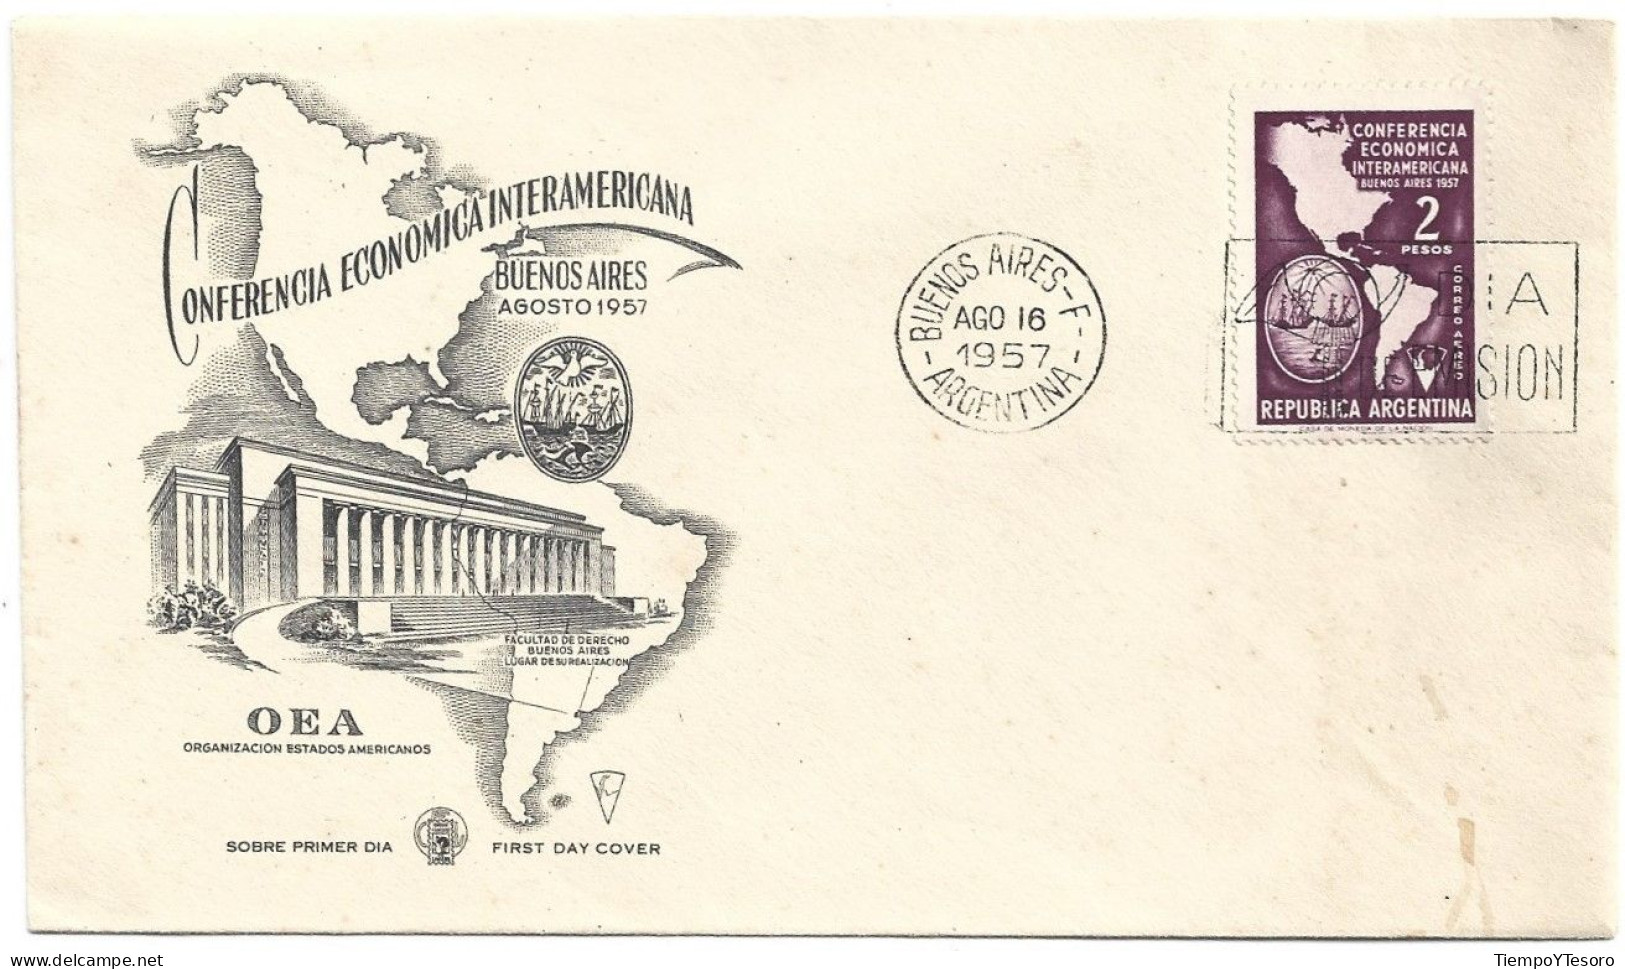 First Day Cover - Argentina, Inter-American Economic Conference, 1957, N°505 - FDC